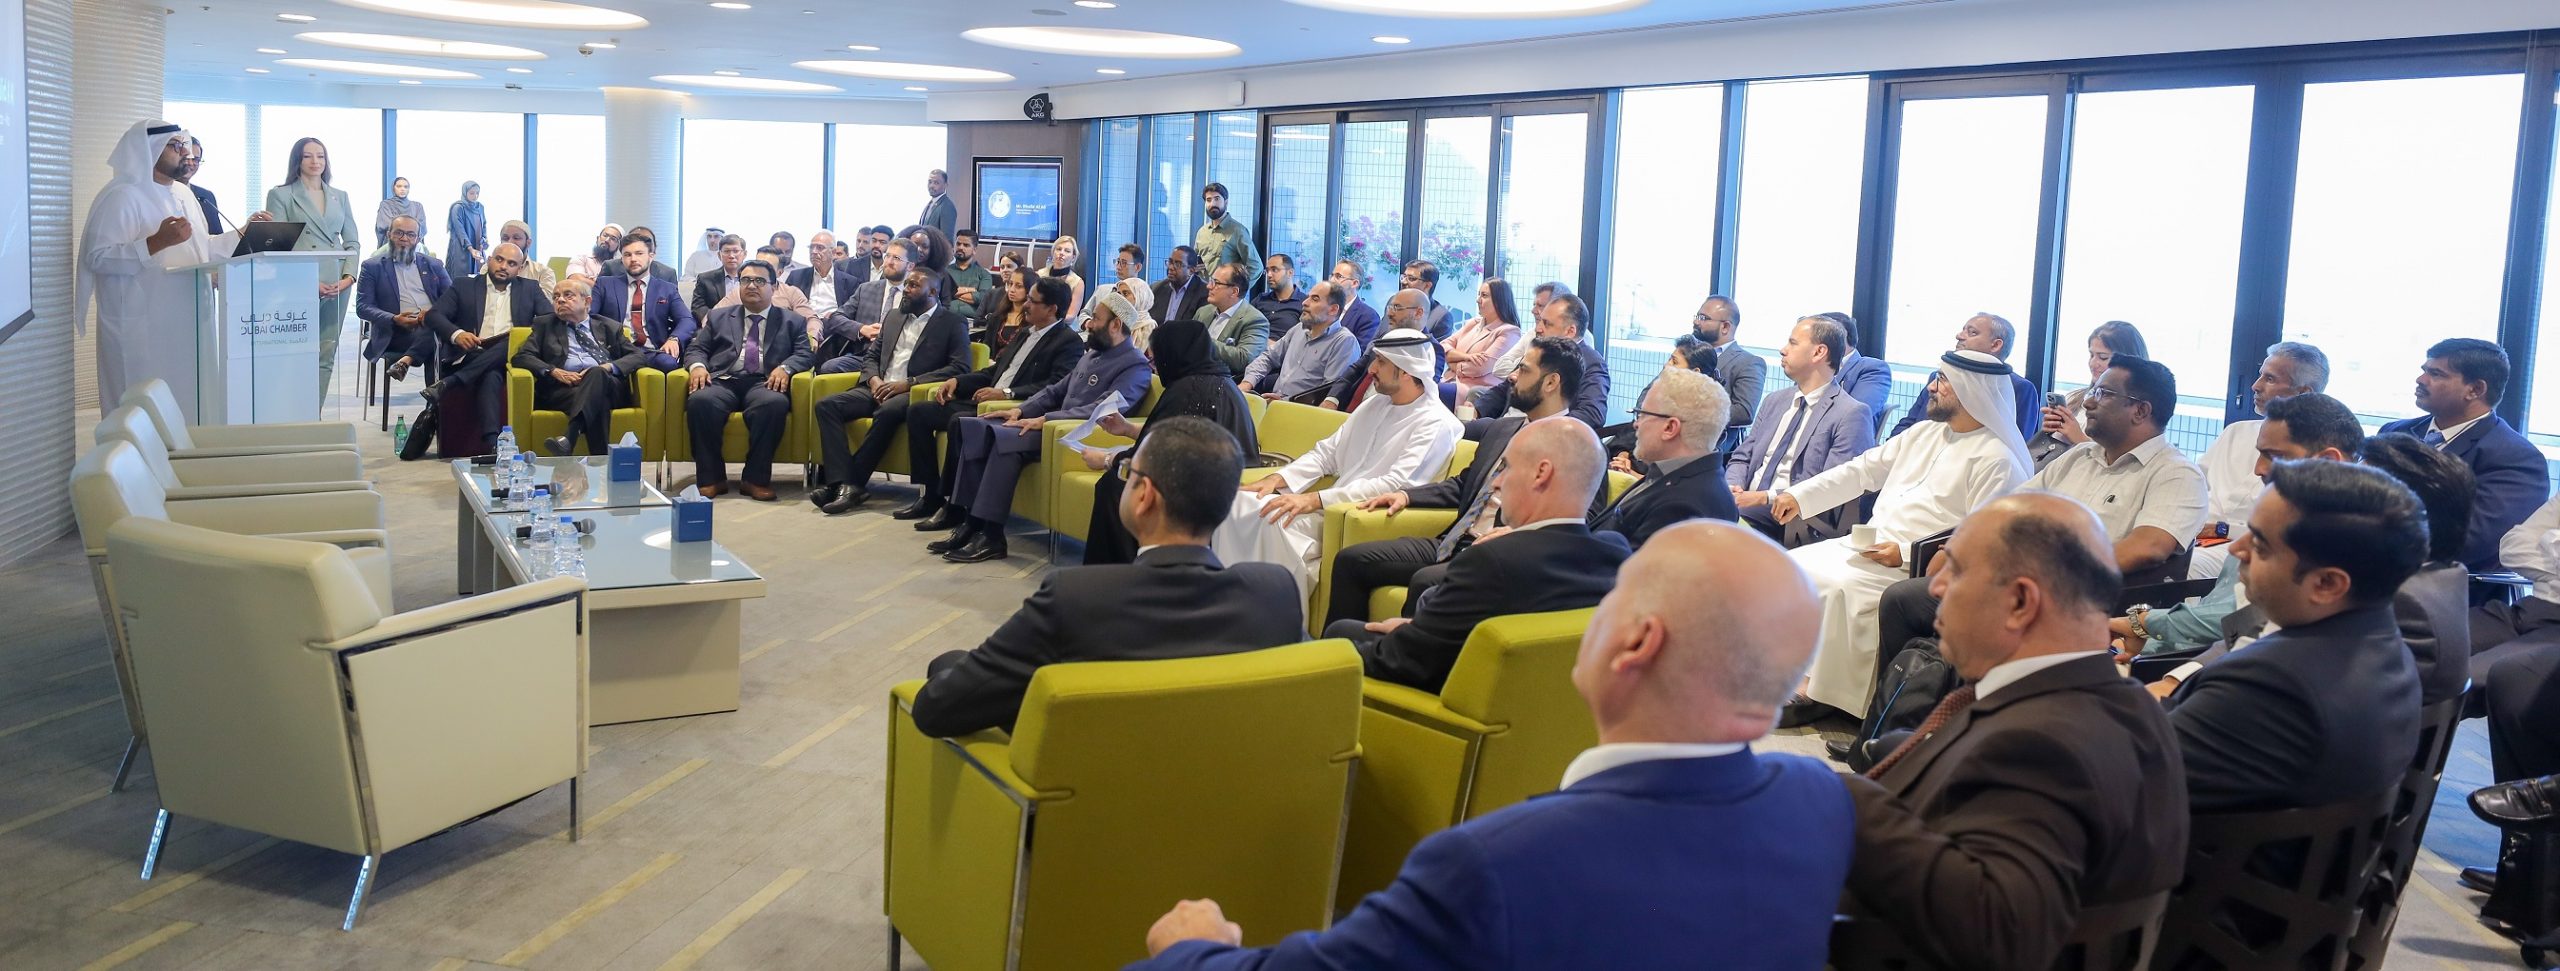 Dubai International Chamber hosts second event in Global Expansion Series to drive international growth of local businesses